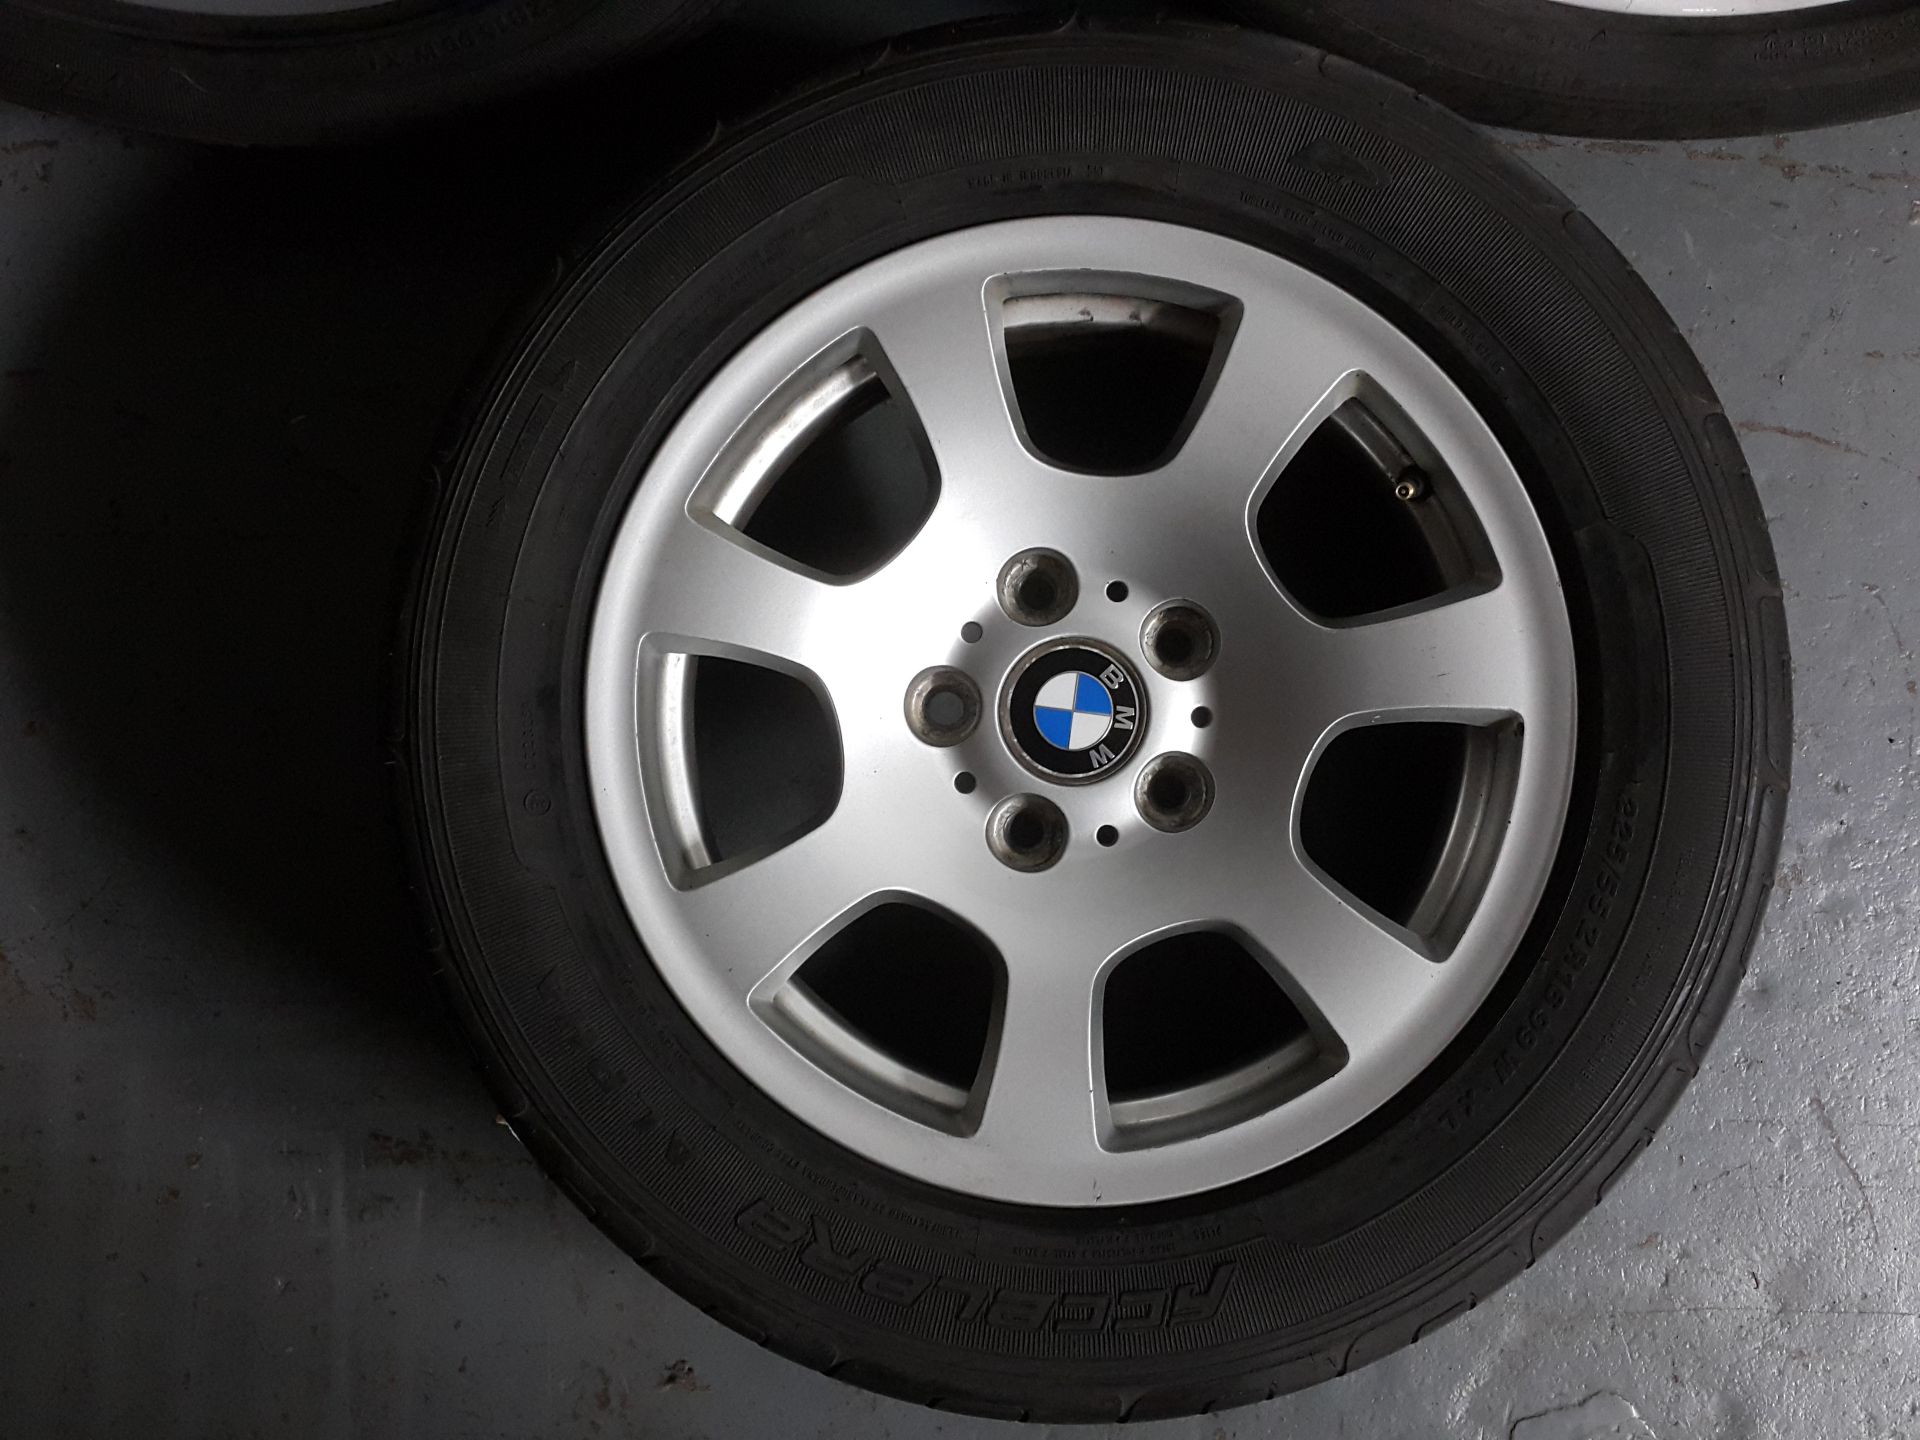 4 X BMW 5 SERIES 16" ALLOY WHEELS WITH TYRES 225/55/R16 - Image 8 of 9